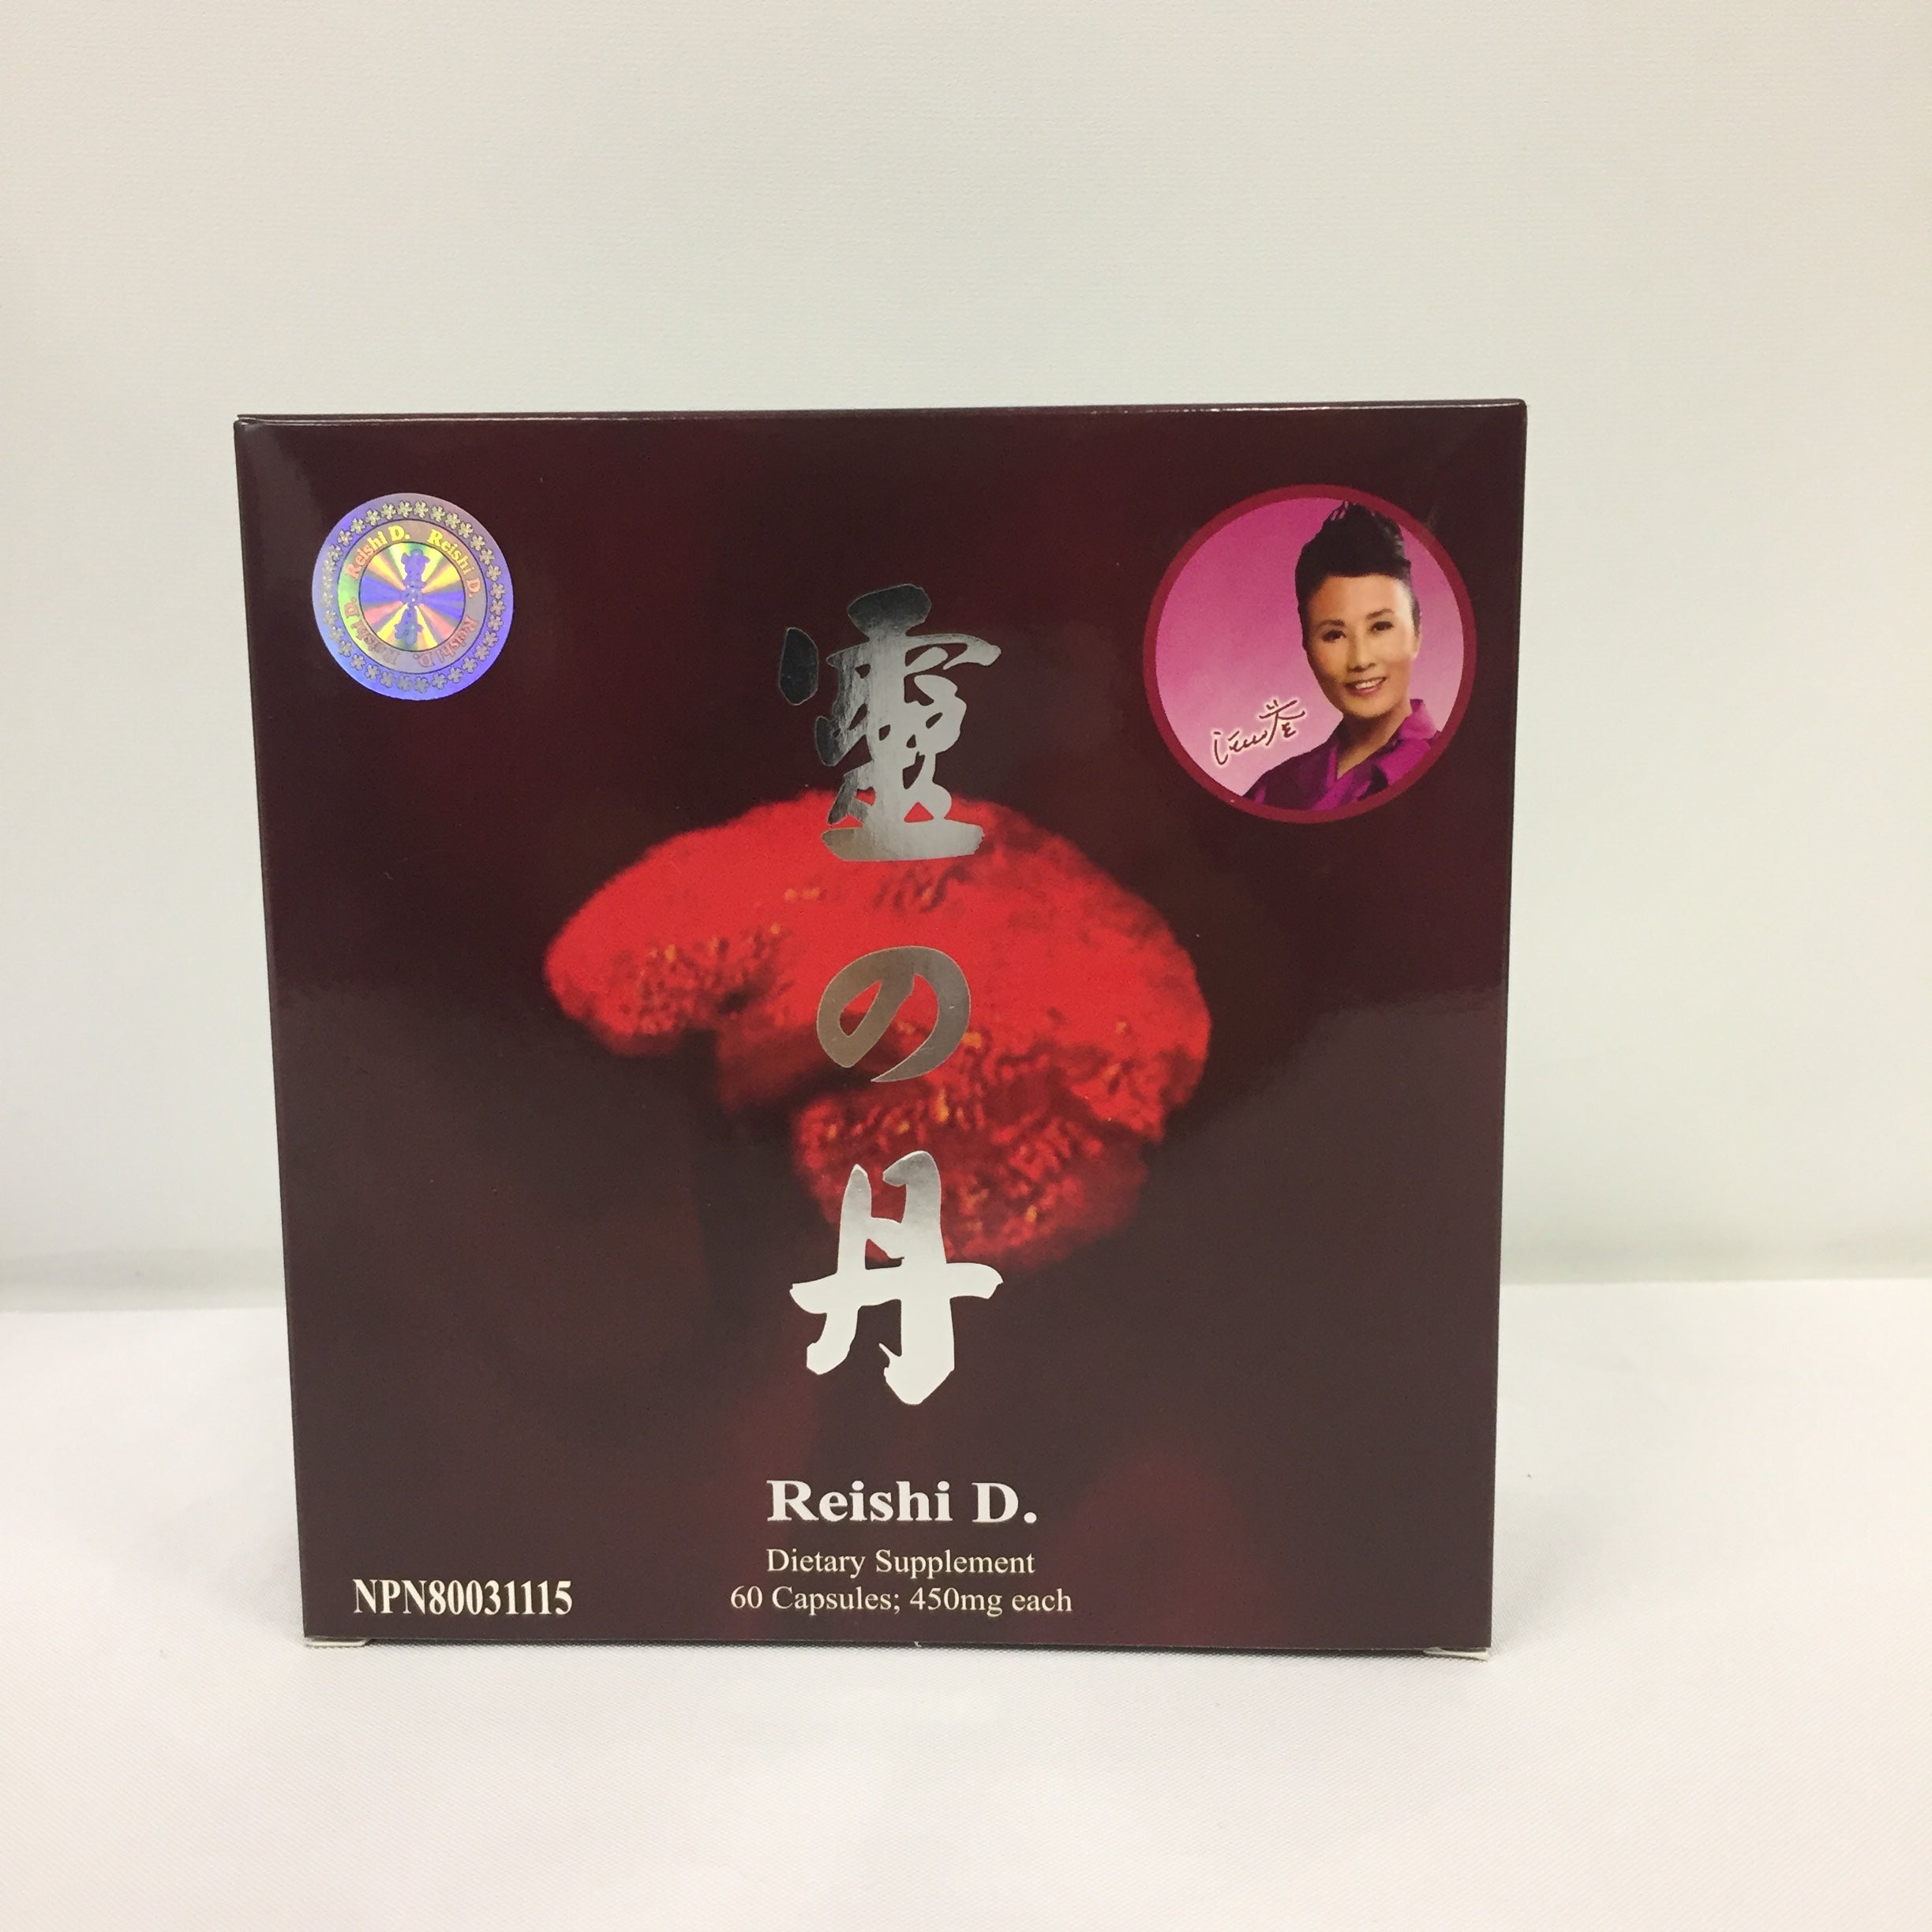 Reishi D. Dietary Supplement (60 Capsules) and Gift Set